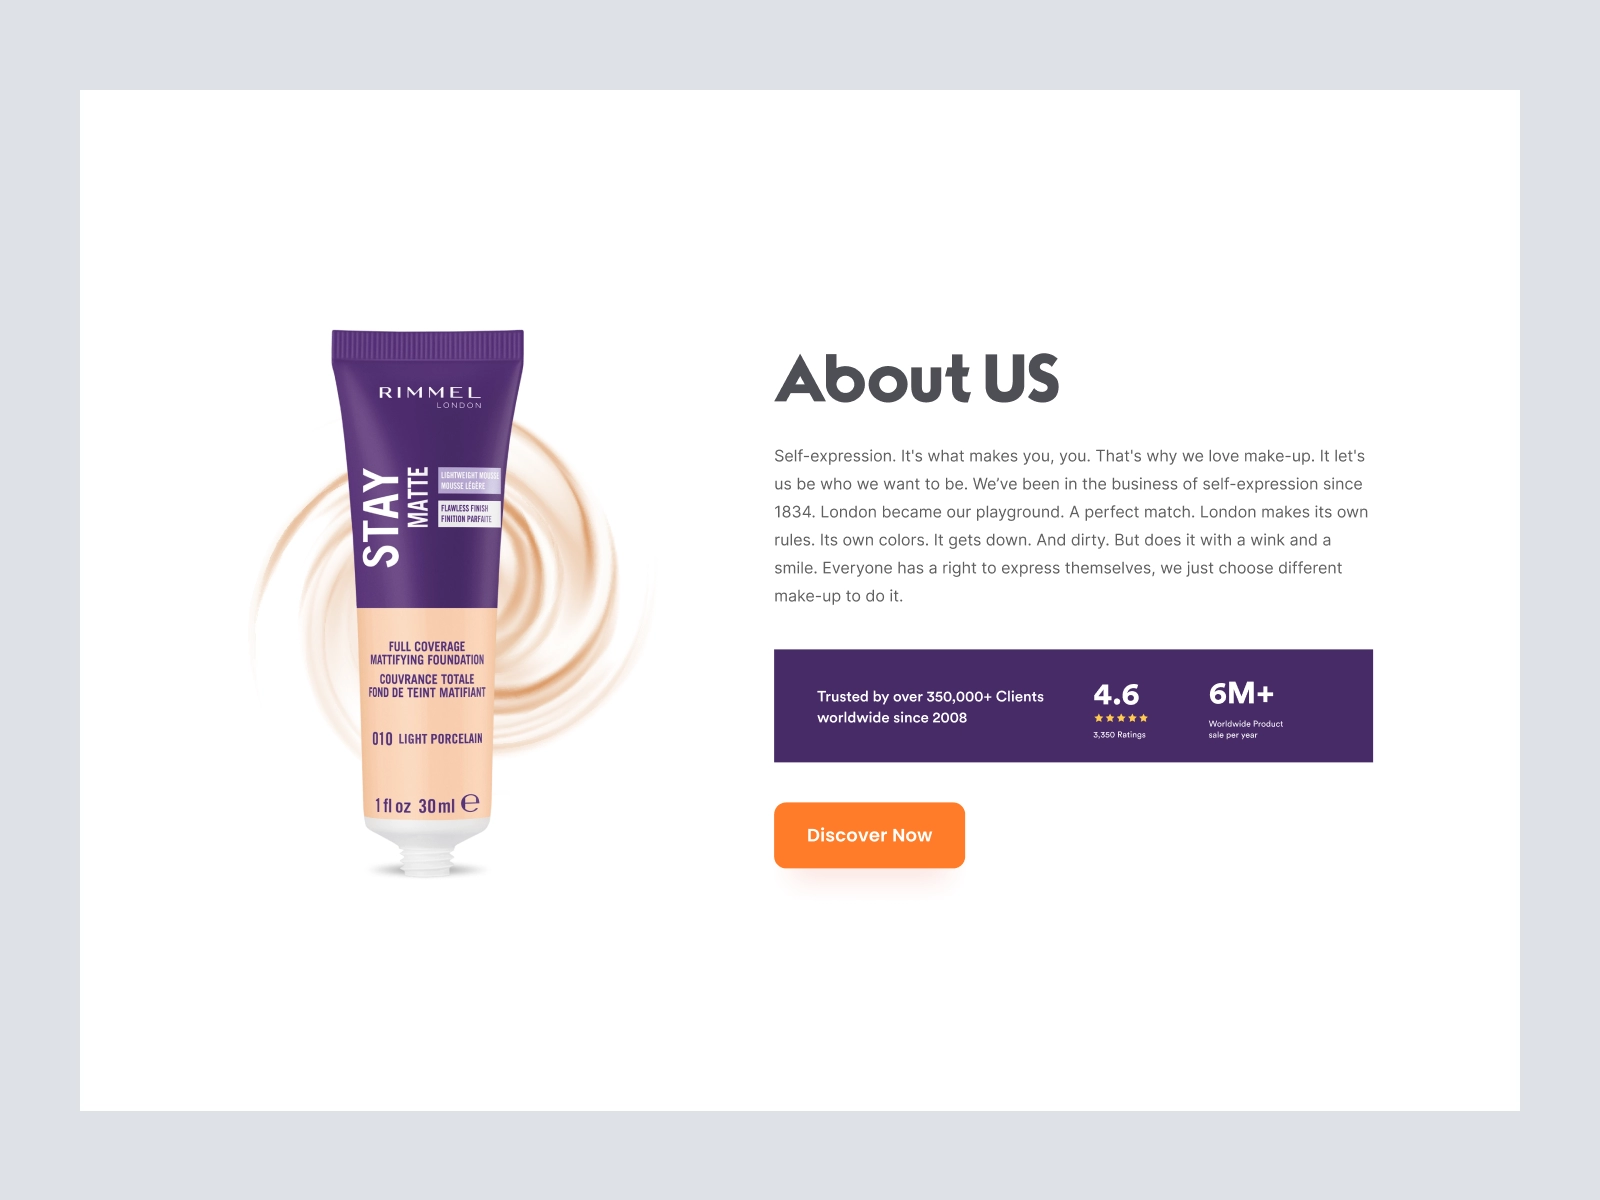 RIMMEL - Shopify Store Design for Cosmetics Products for Figma and Adobe XD - screen 4